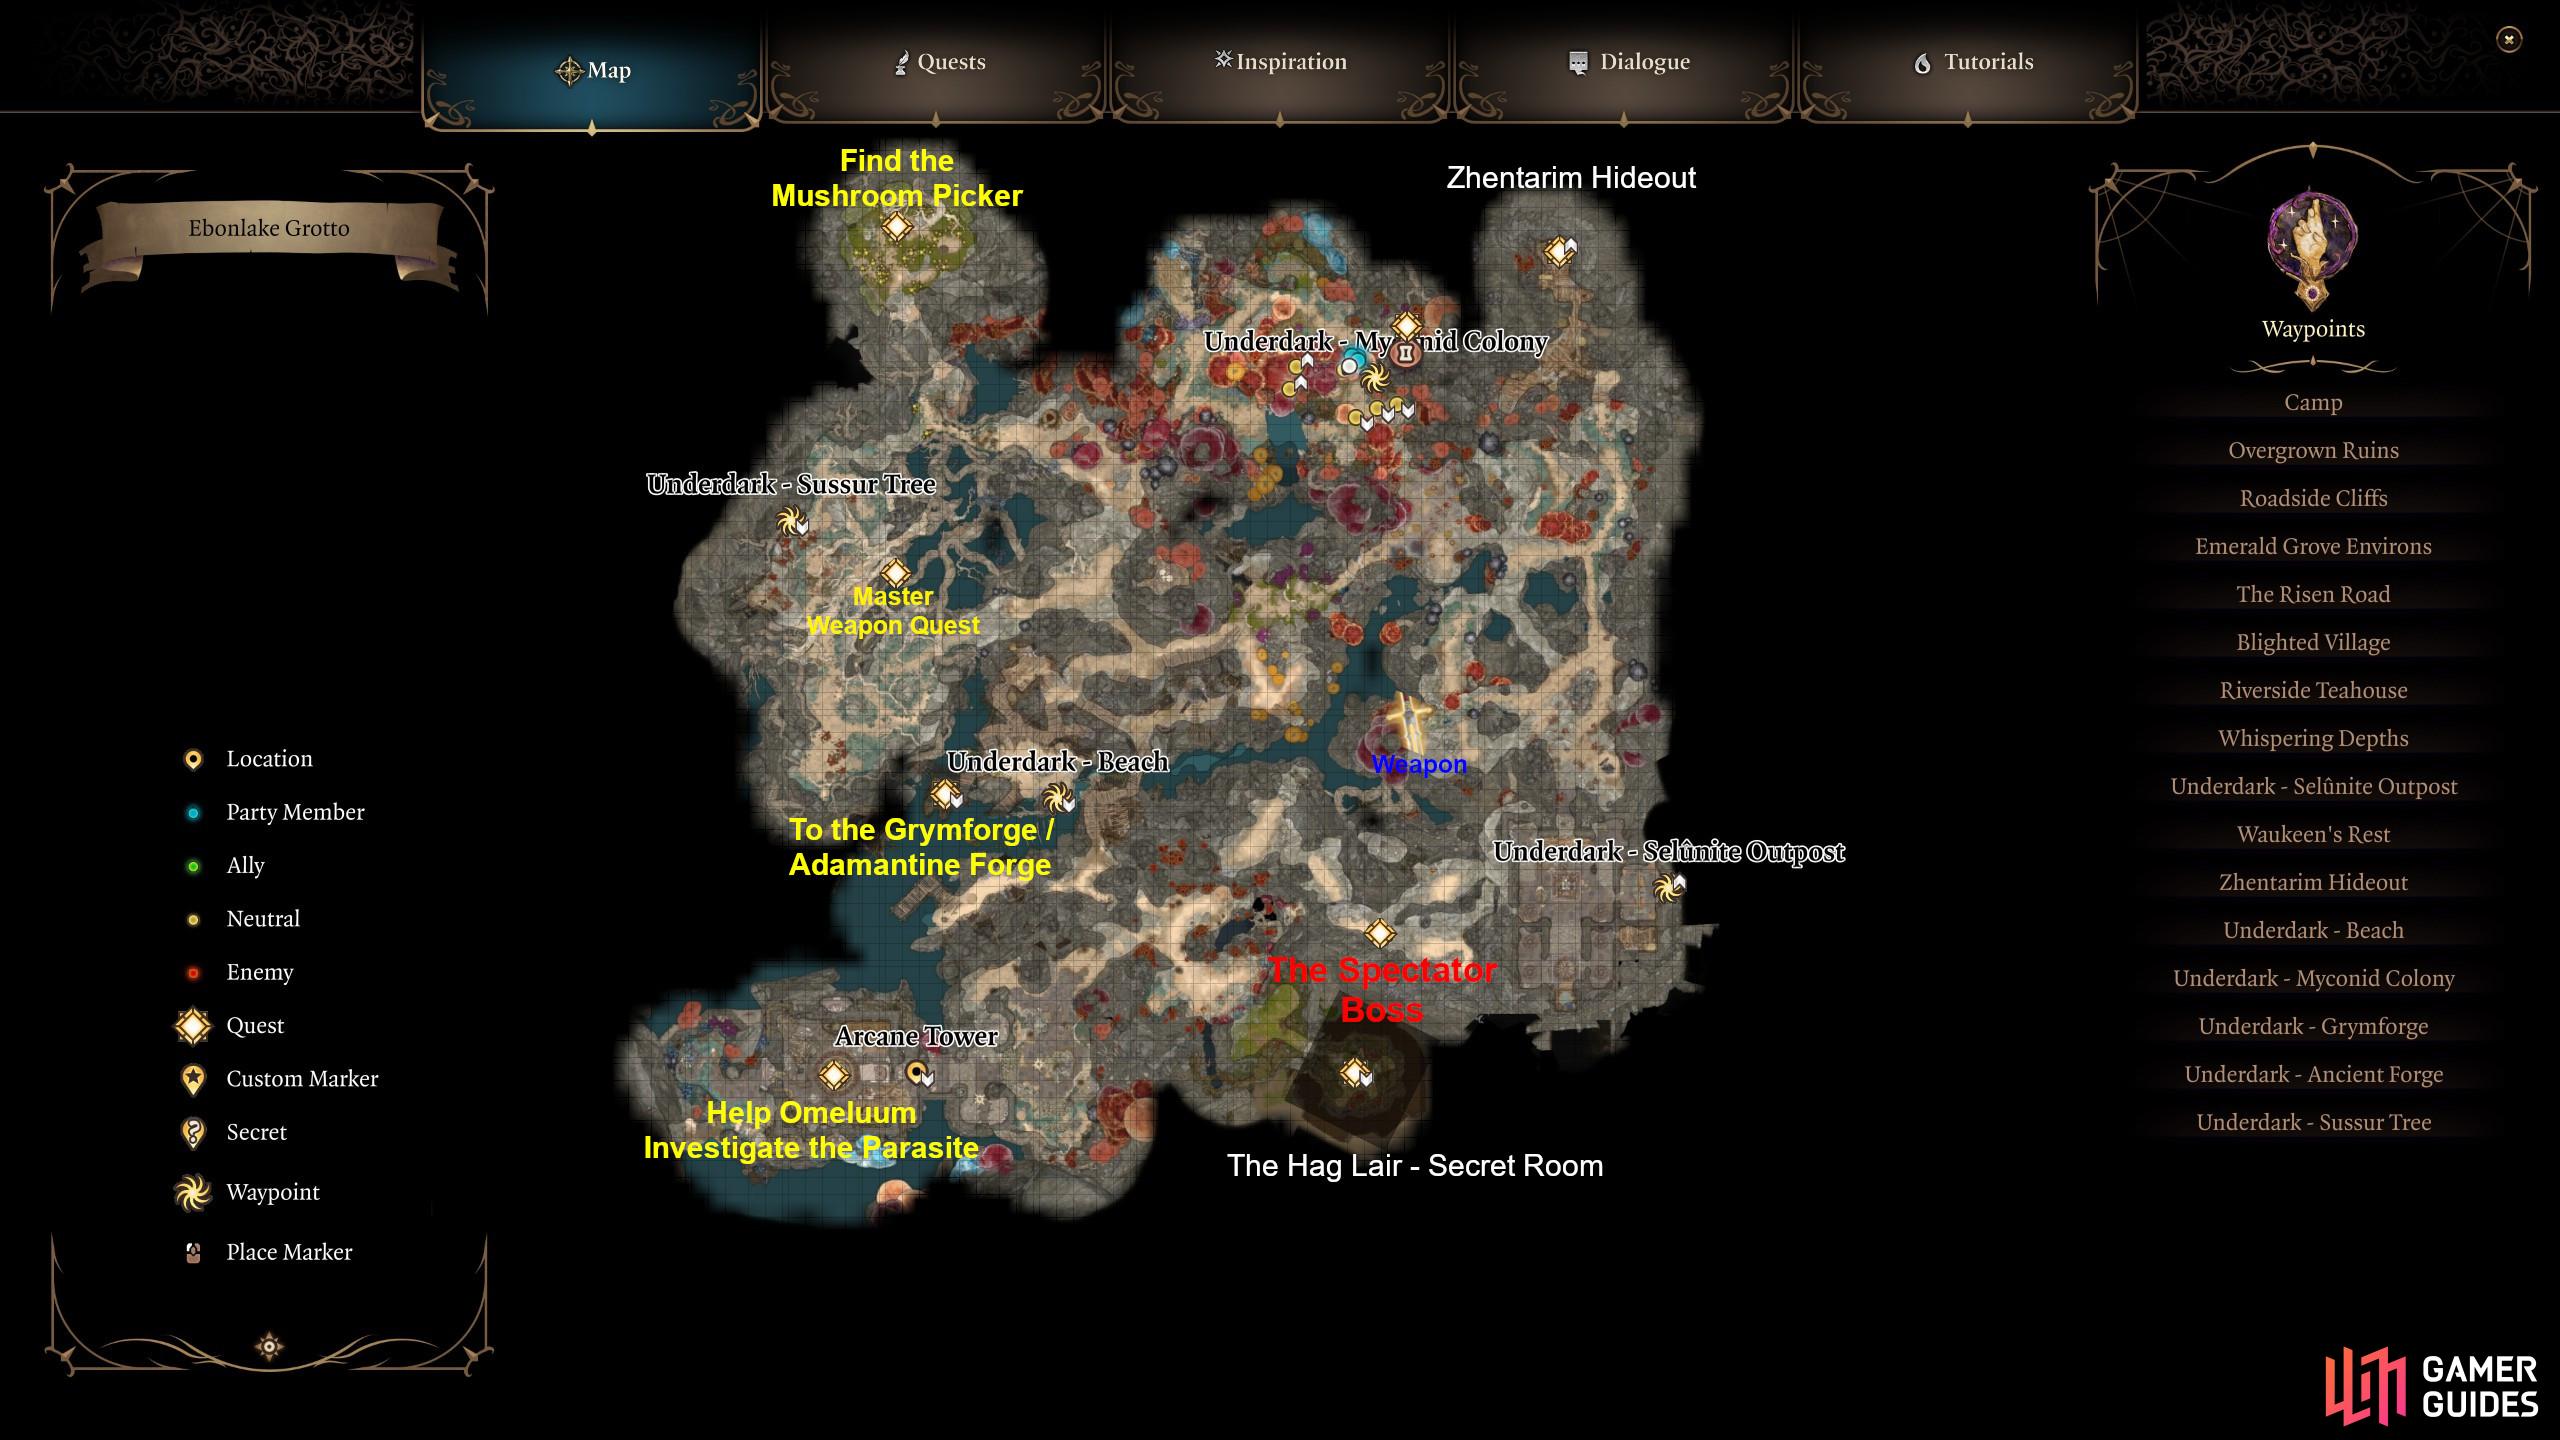 Here is a map detailing all the major quests and landmarks you can visit for the Underdark in BG3.